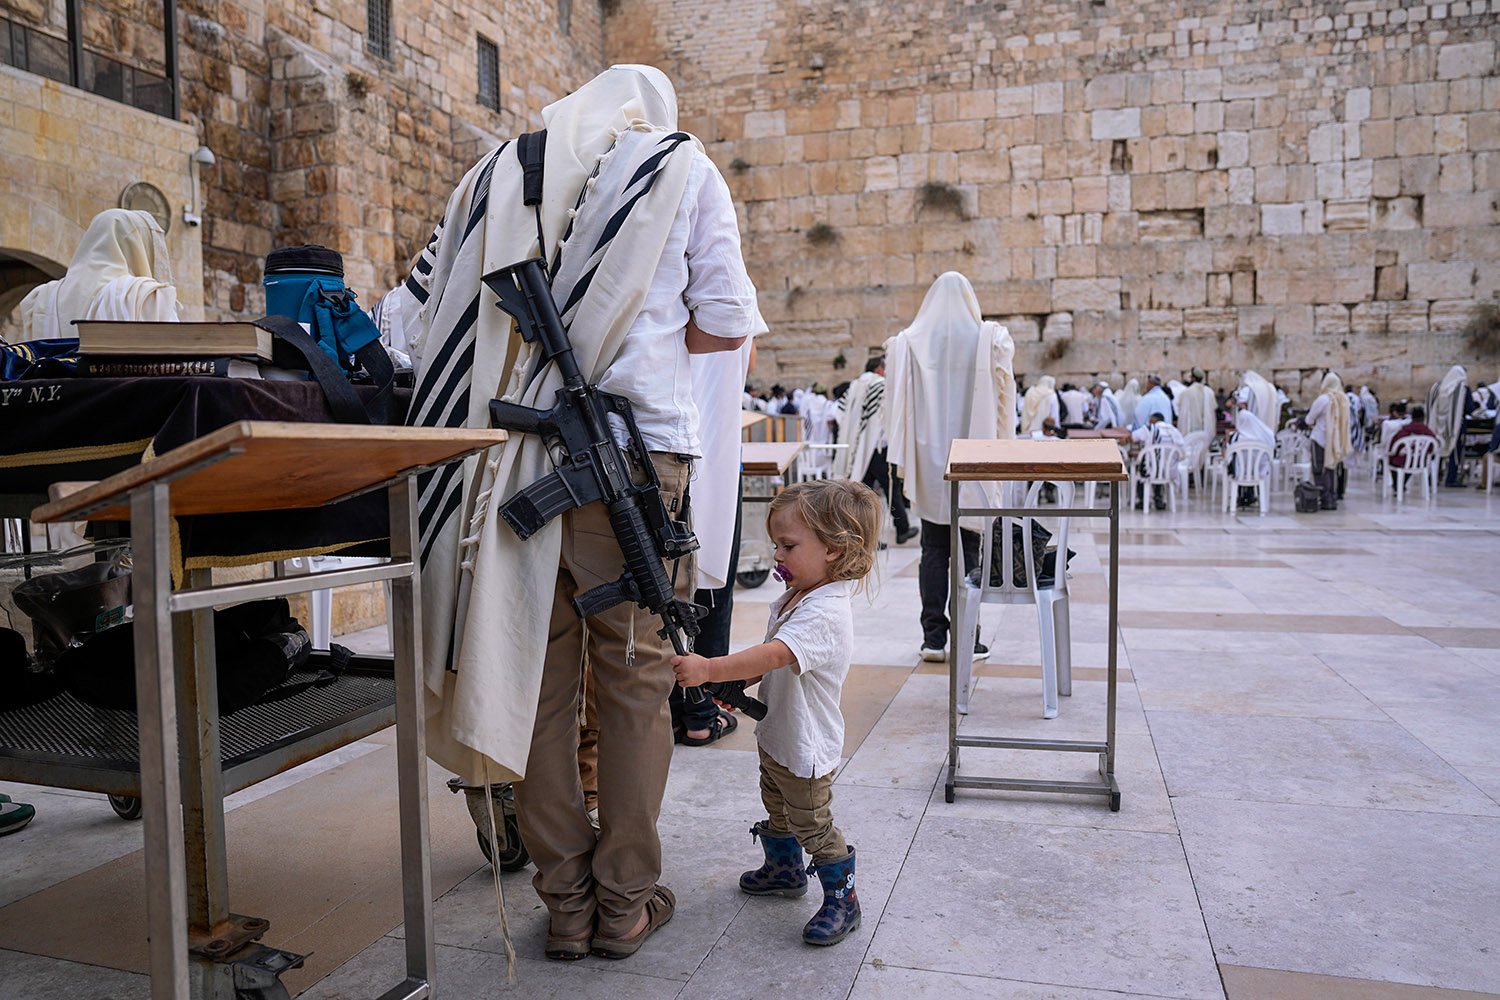  An off-duty member of Israel's security forces joins worshippers at the Western Wall, the holiest site where Jews can pray, in the Old City of Jerusalem, Tuesday, Nov. 14, 2023. Tens of thousands of Israeli reservists have been called up for action 